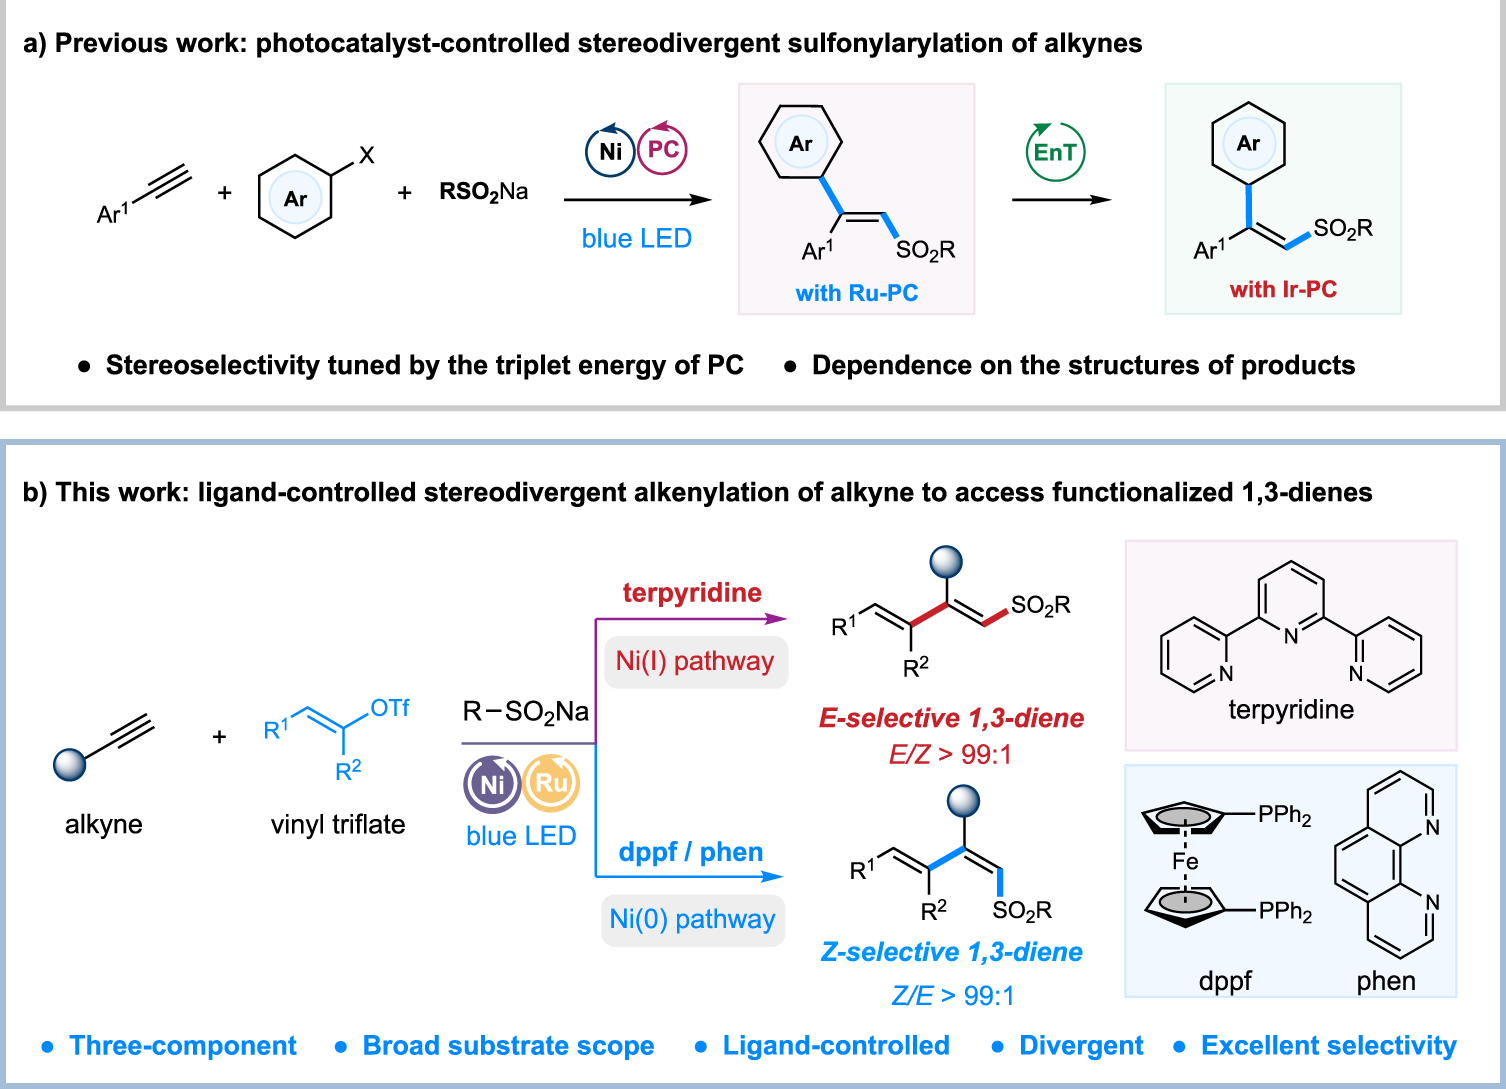 Ligand-controlled stereodivergent alkenylation of alkynes to access  functionalized trans- and cis-1,3-dienes